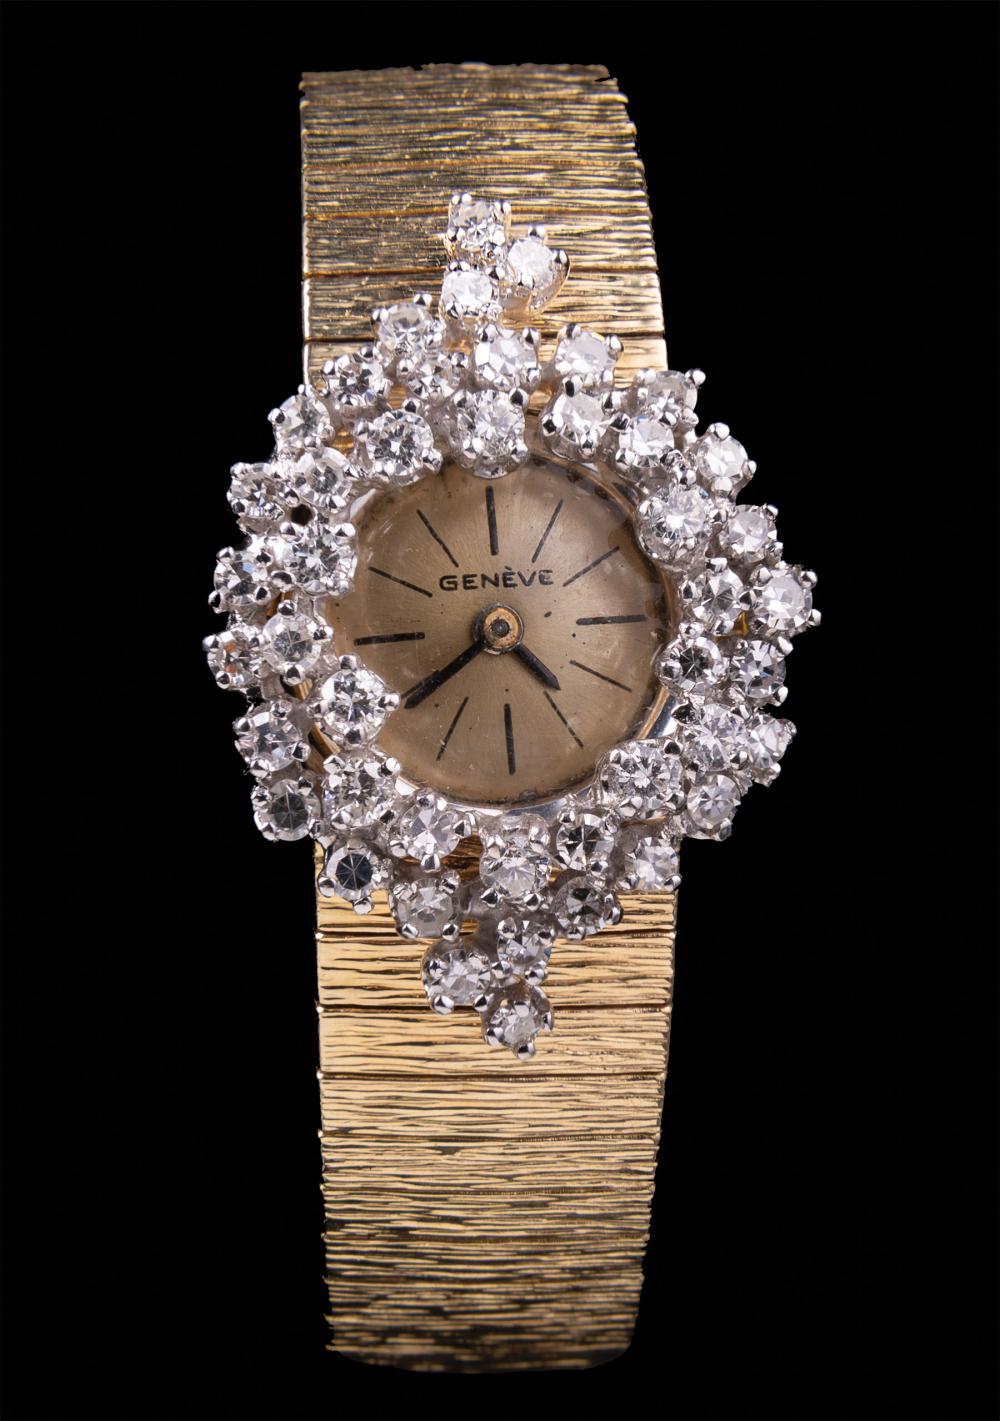 LADYS 14 KT. GOLD AND DIAMOND GENEVE